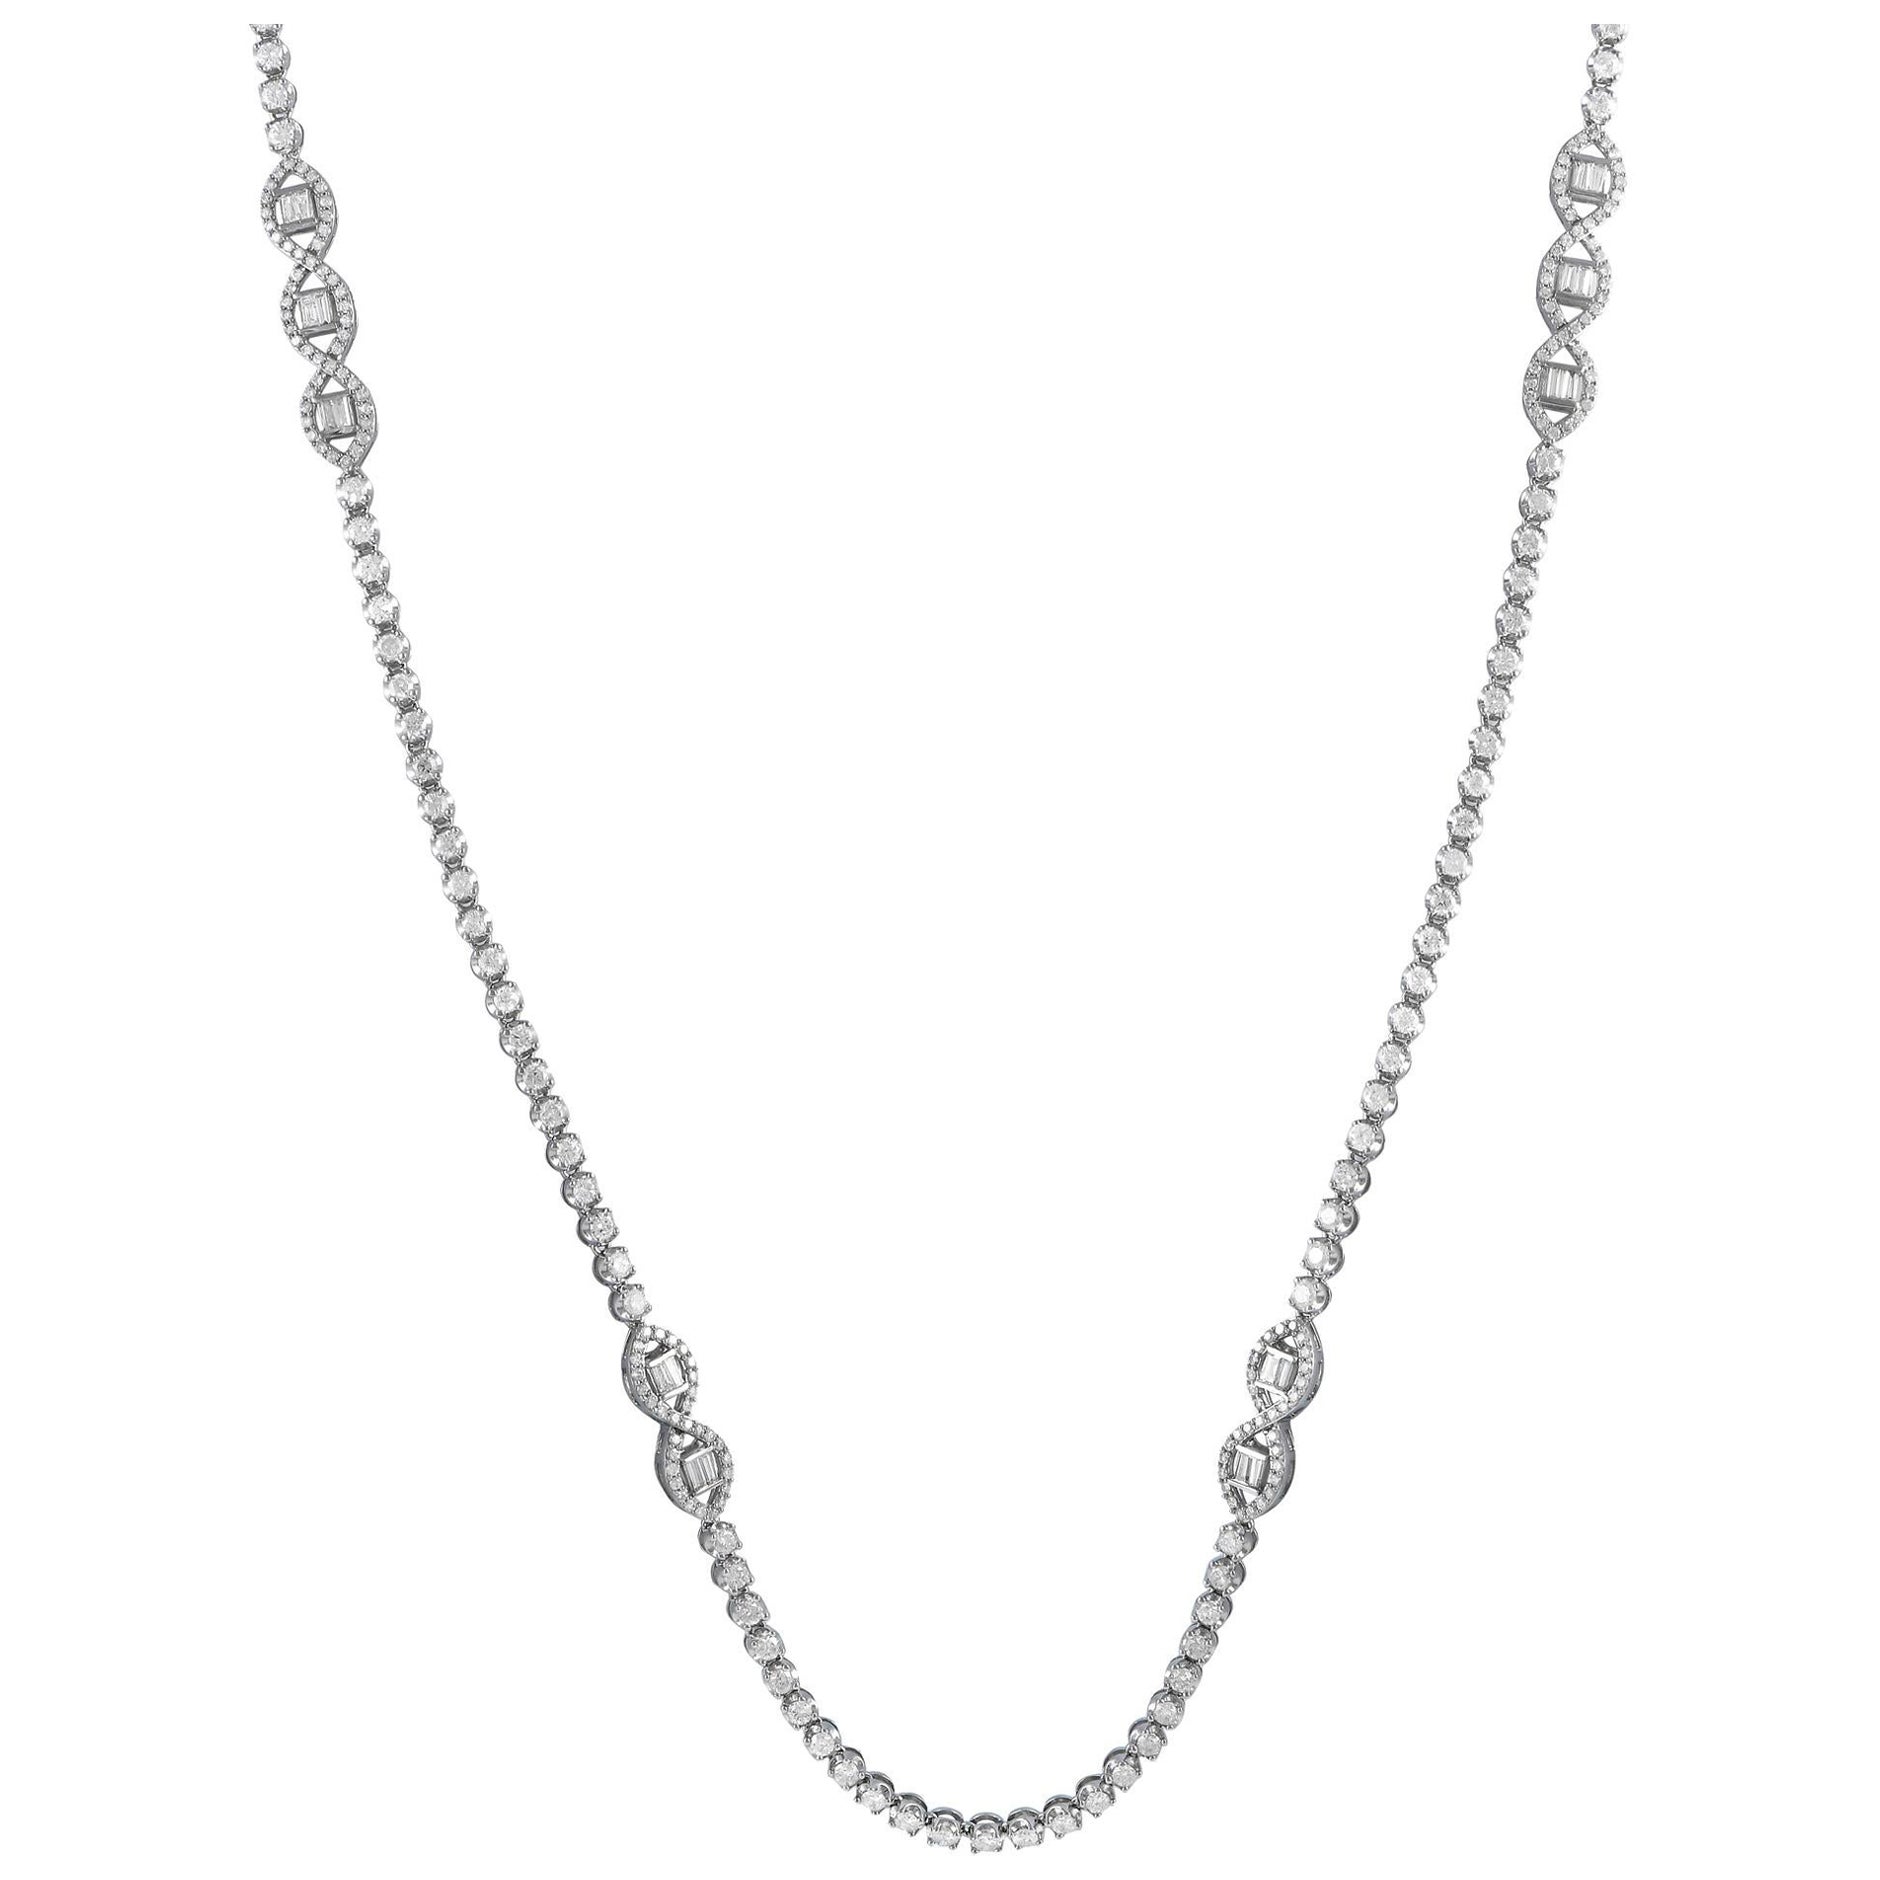 LB Exclusive 18K White Gold 10.80ct Diamond Necklace NK01362 For Sale